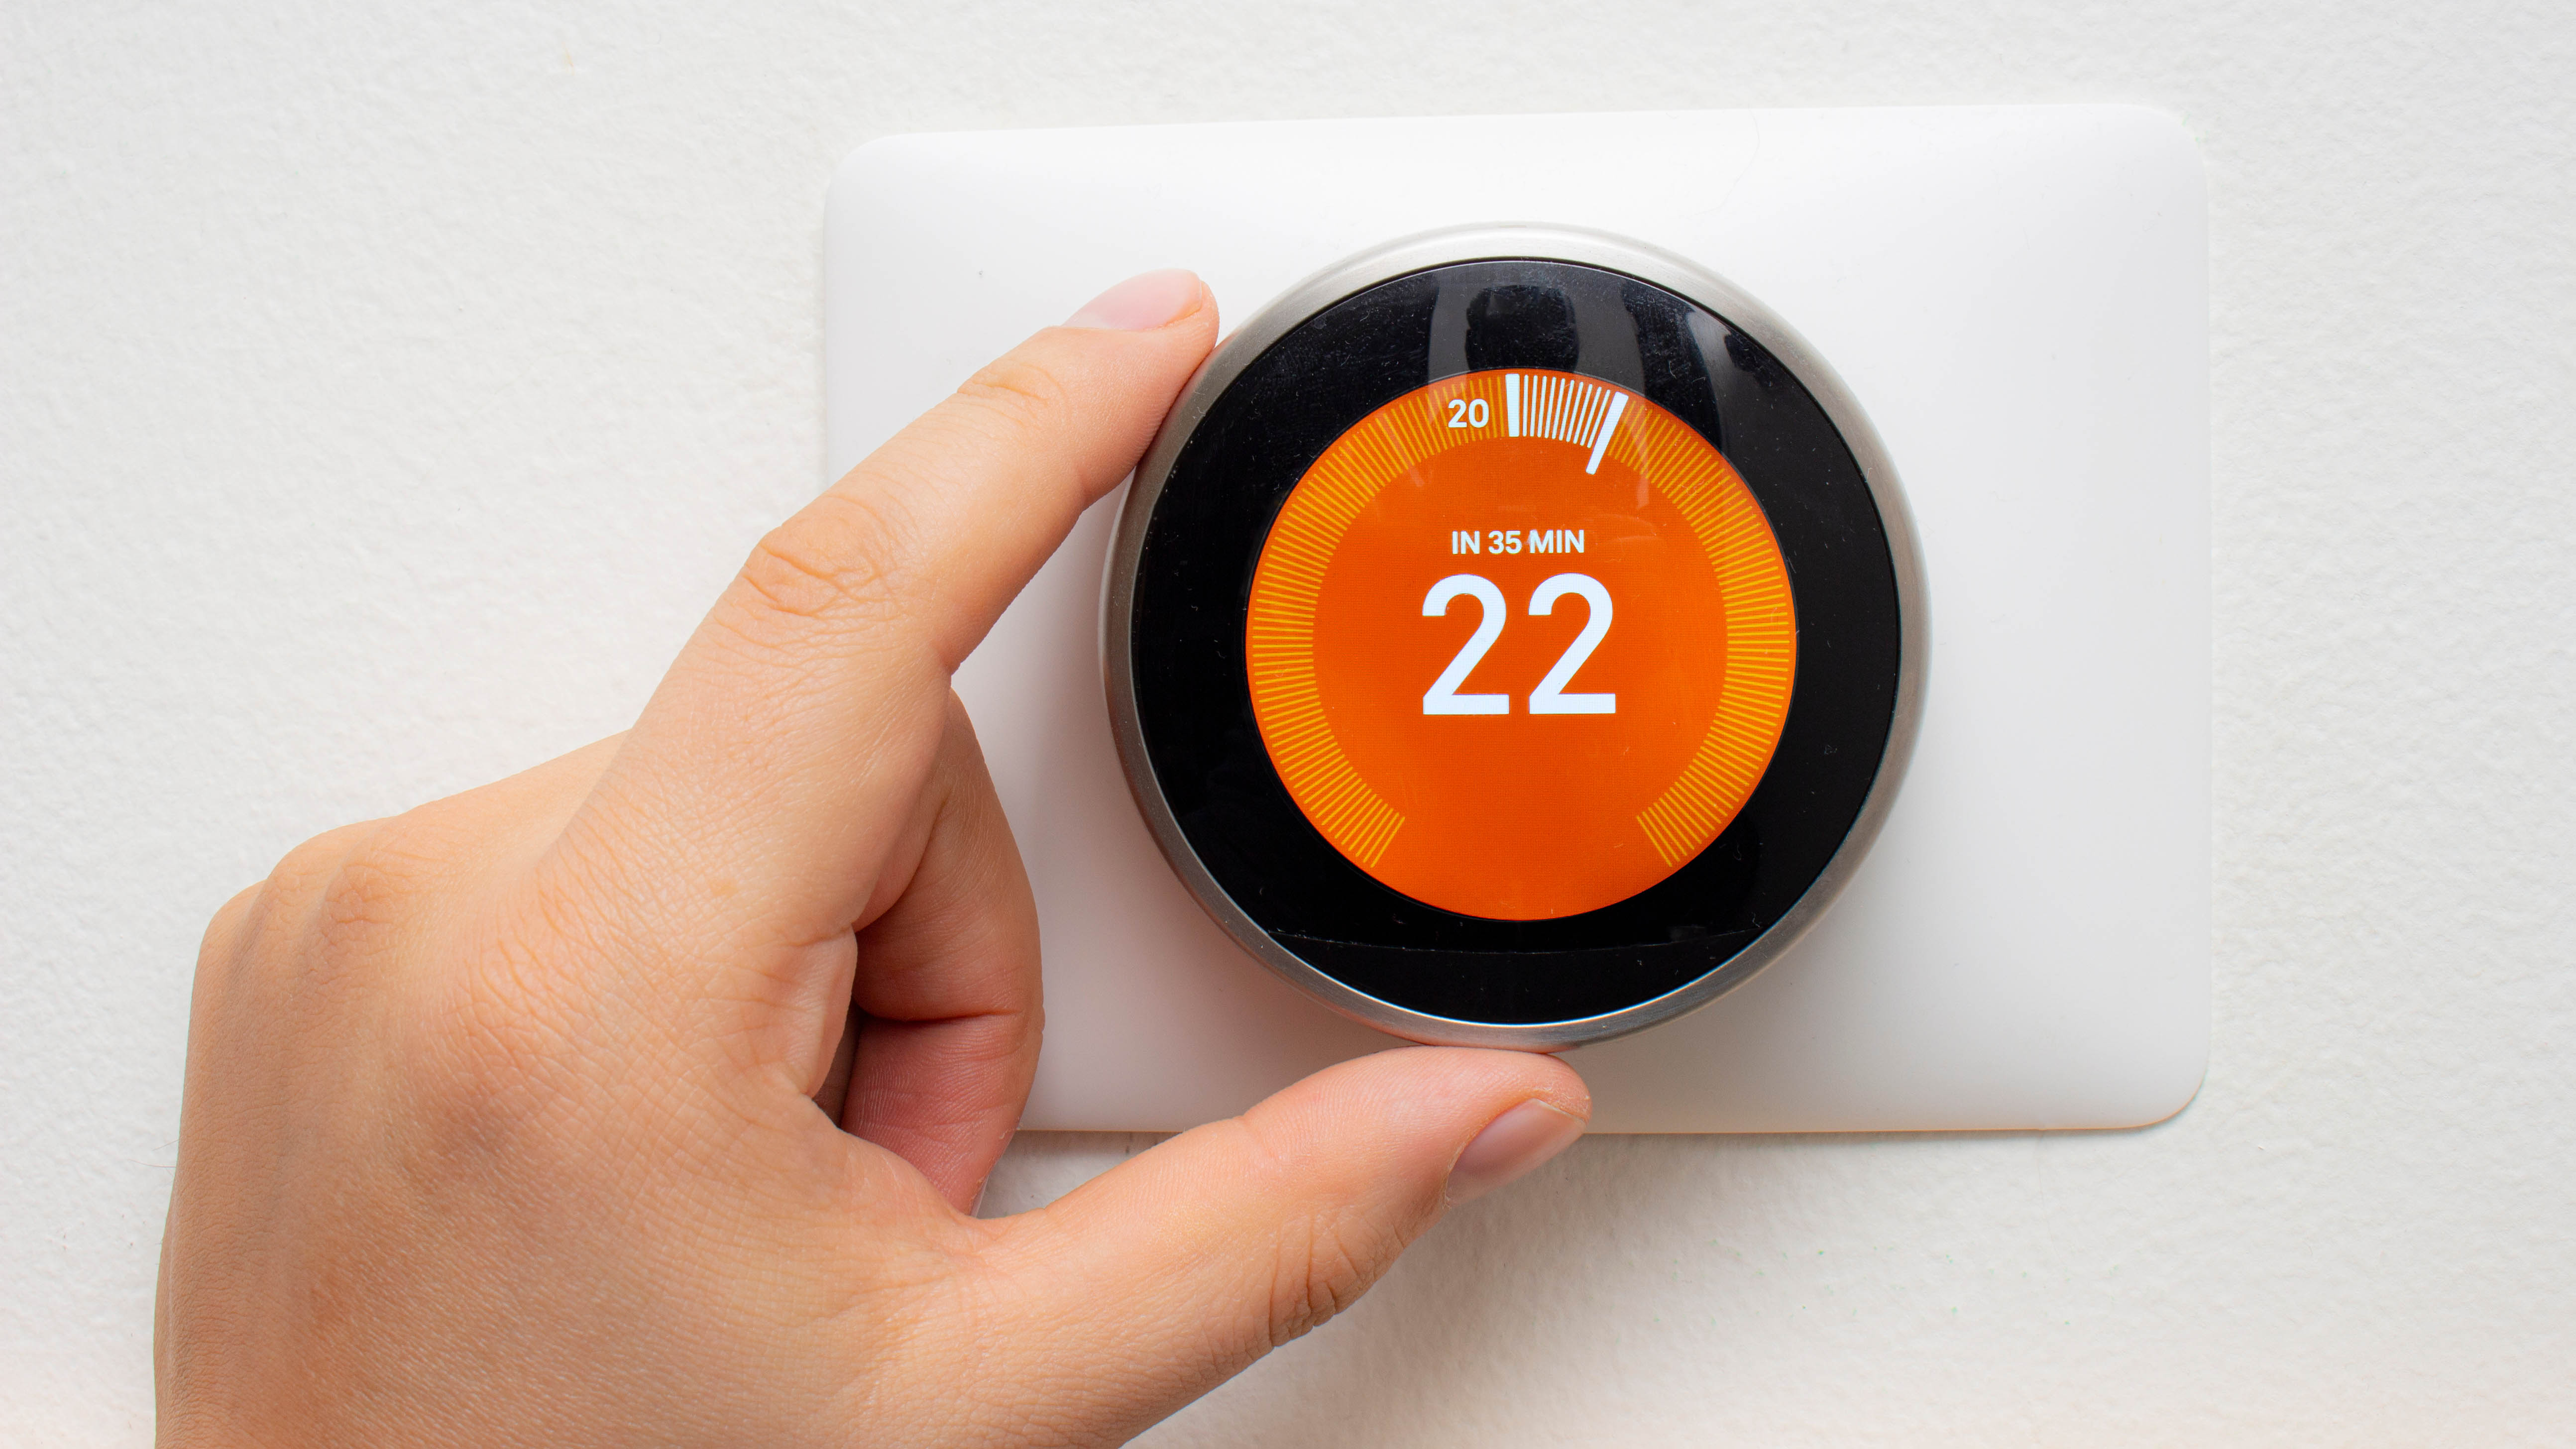 The smart thermostat control panel is manually set